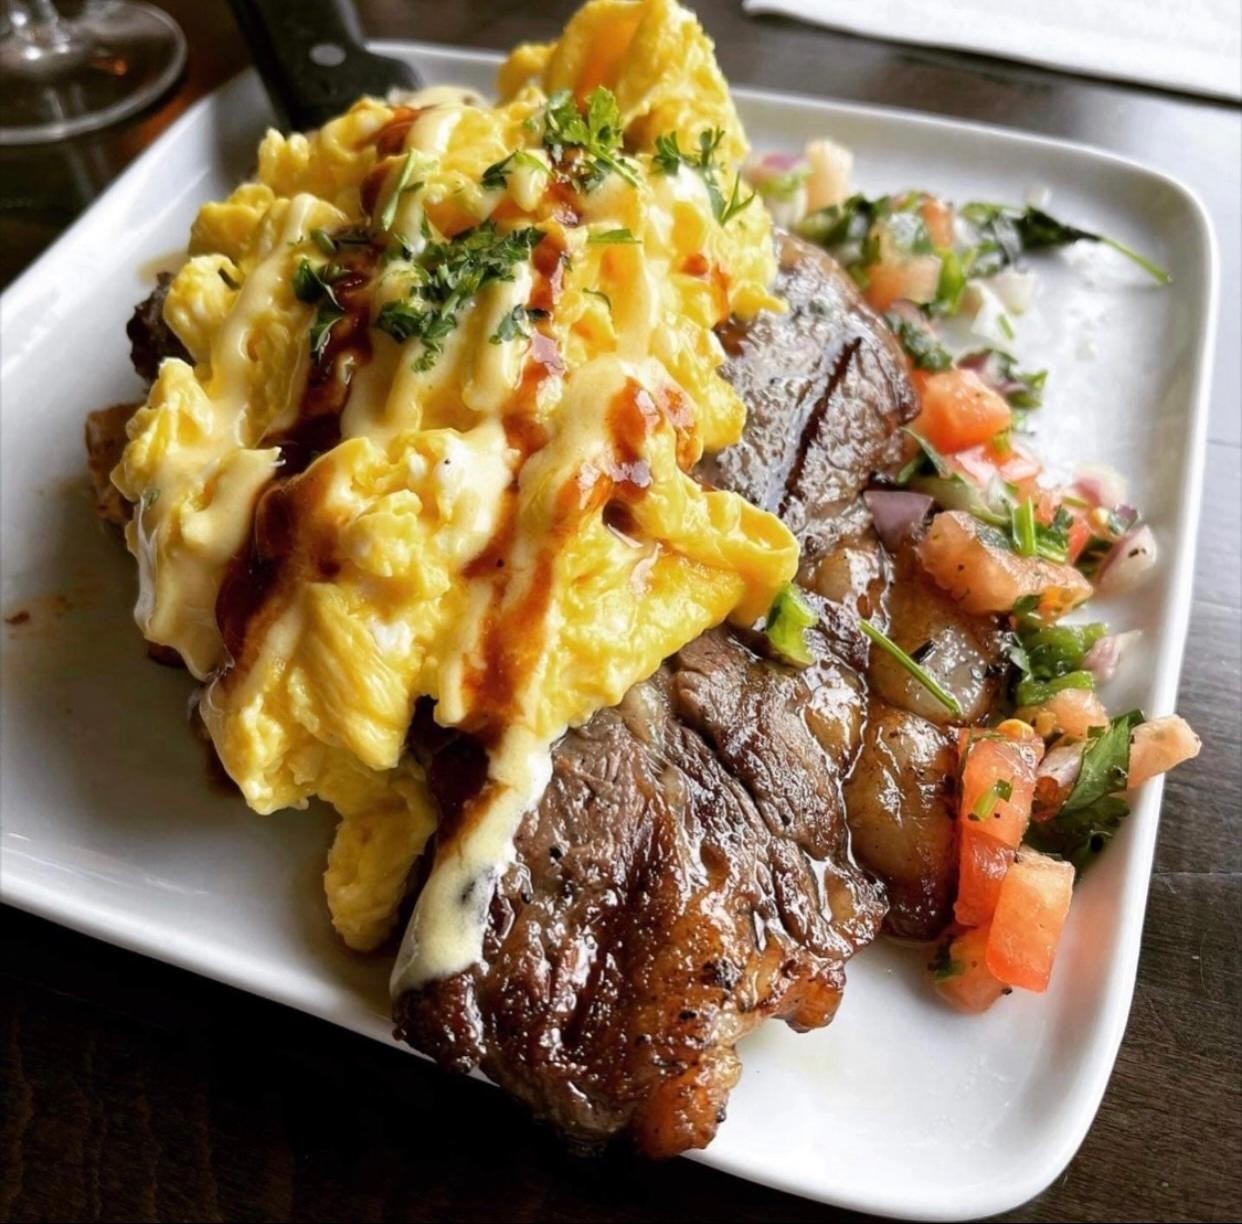 Taco Streets own Steak and Eggs